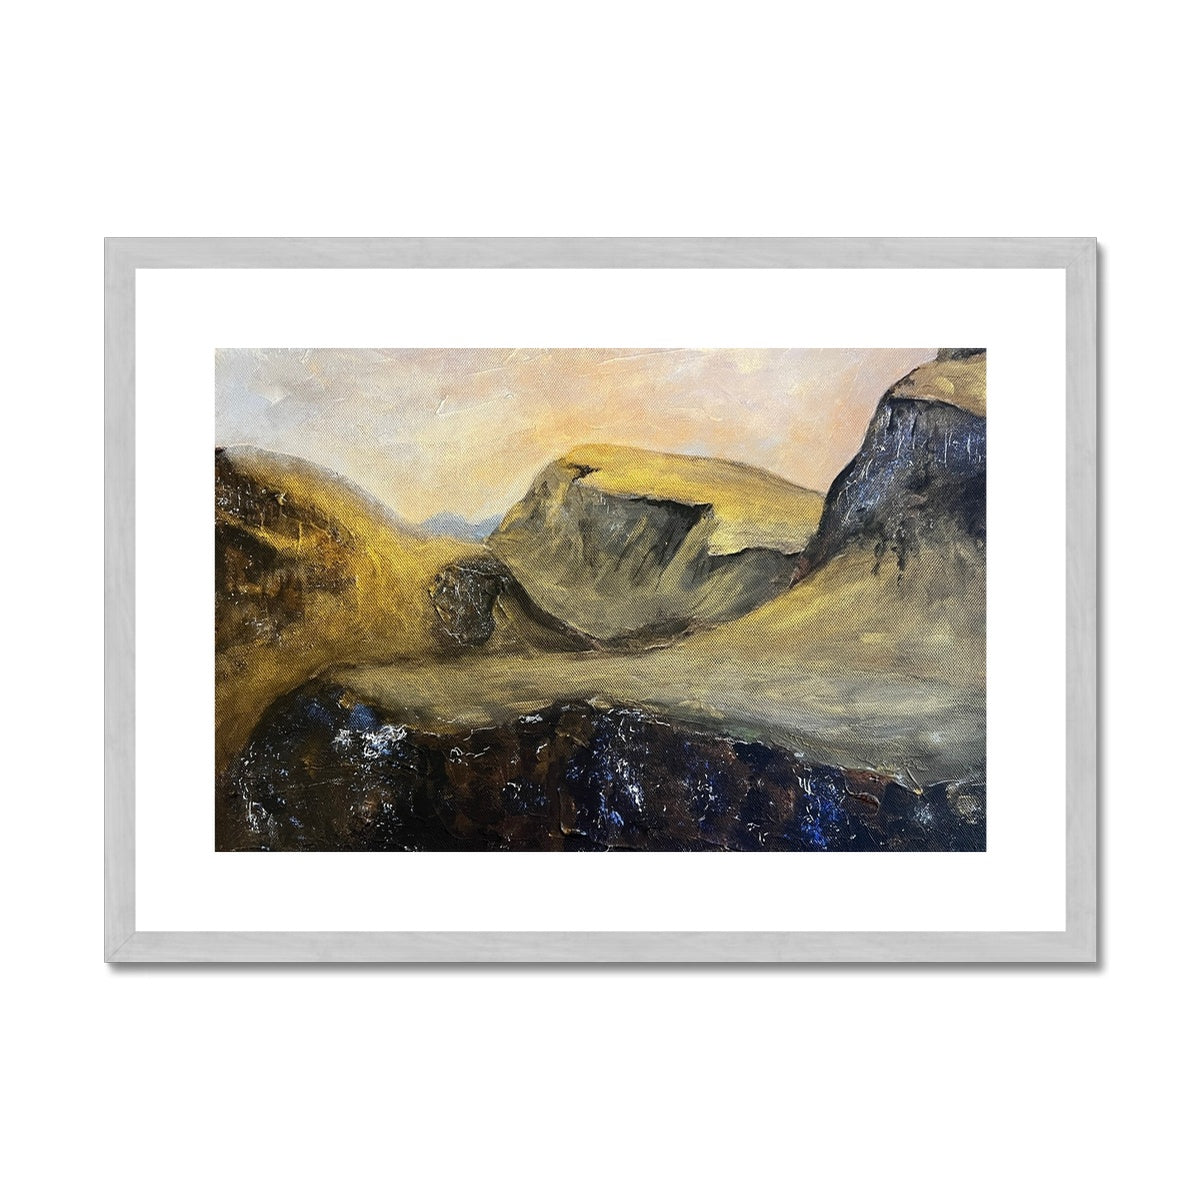 The Quiraing Skye Painting | Antique Framed & Mounted Prints From Scotland-Antique Framed & Mounted Prints-Skye Art Gallery-A2 Landscape-Silver Frame-Paintings, Prints, Homeware, Art Gifts From Scotland By Scottish Artist Kevin Hunter